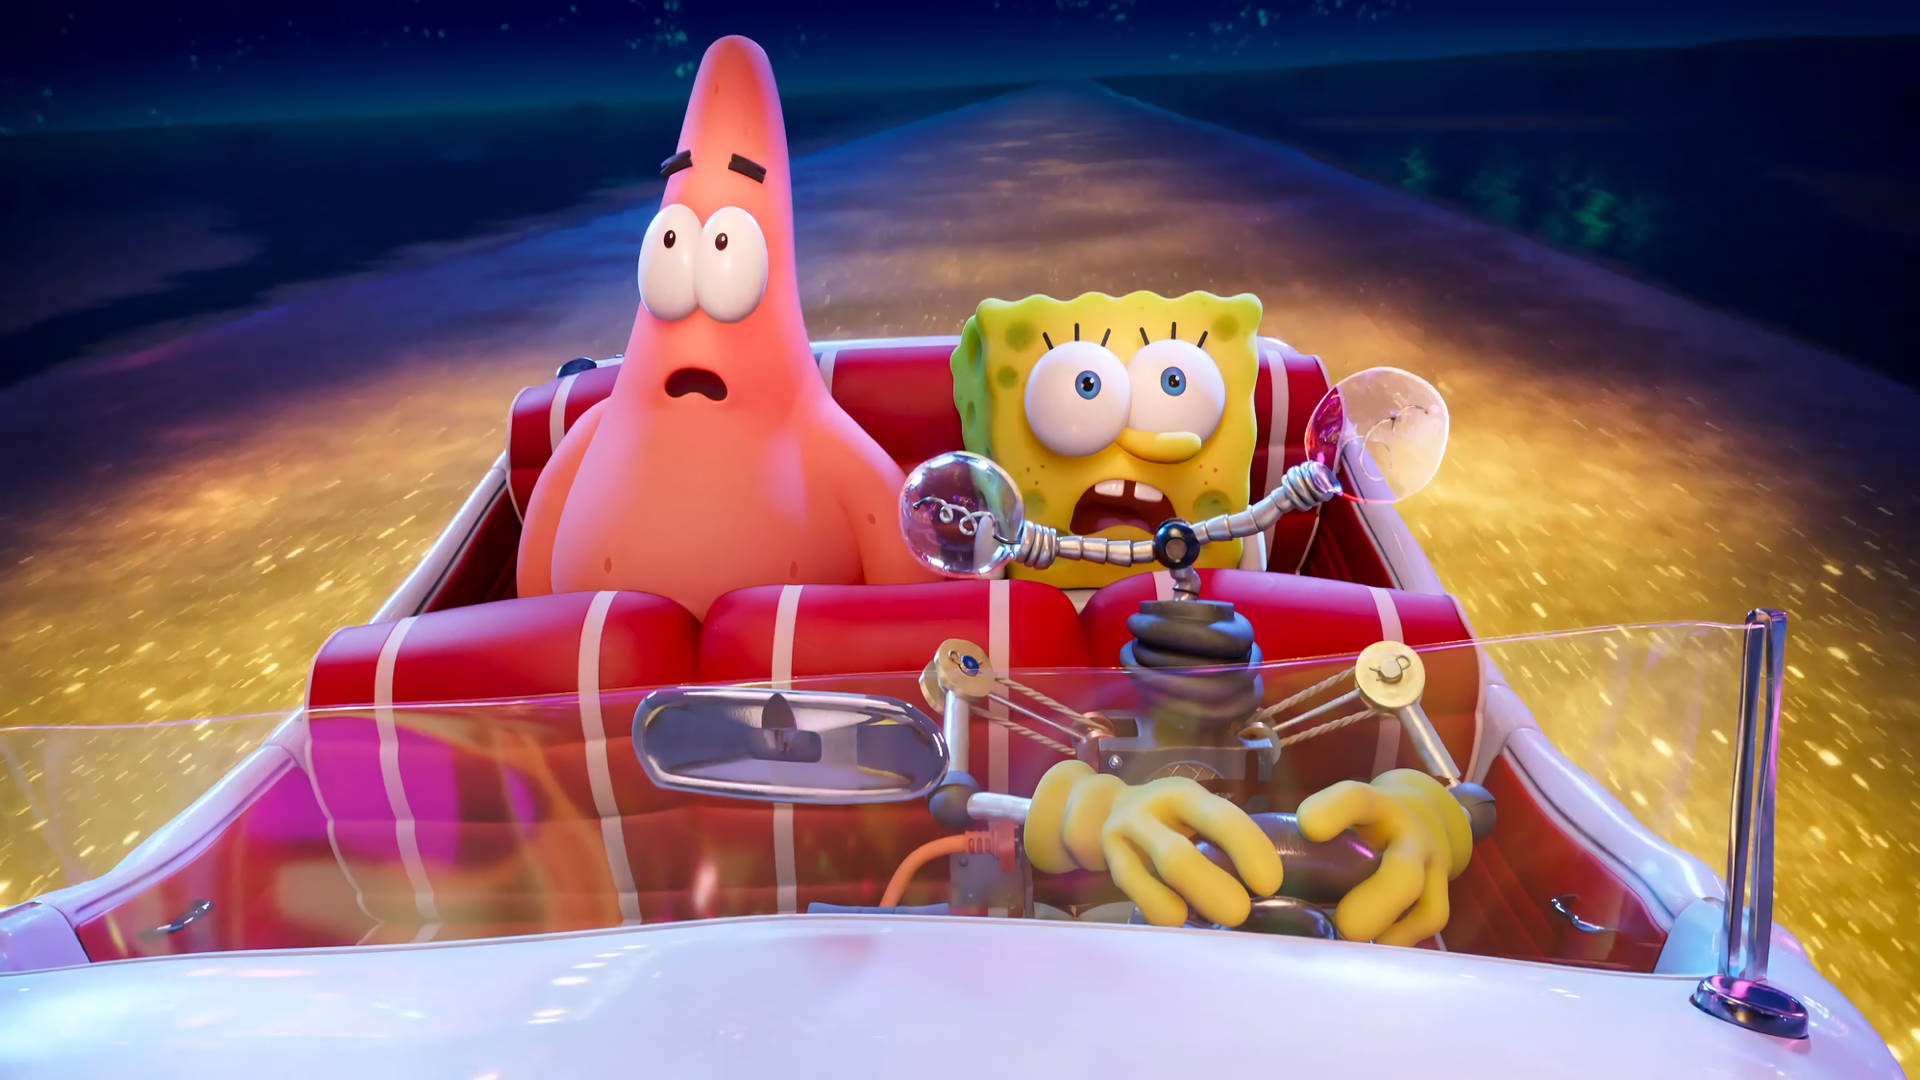 Spongebob And Patrick In A Car Background